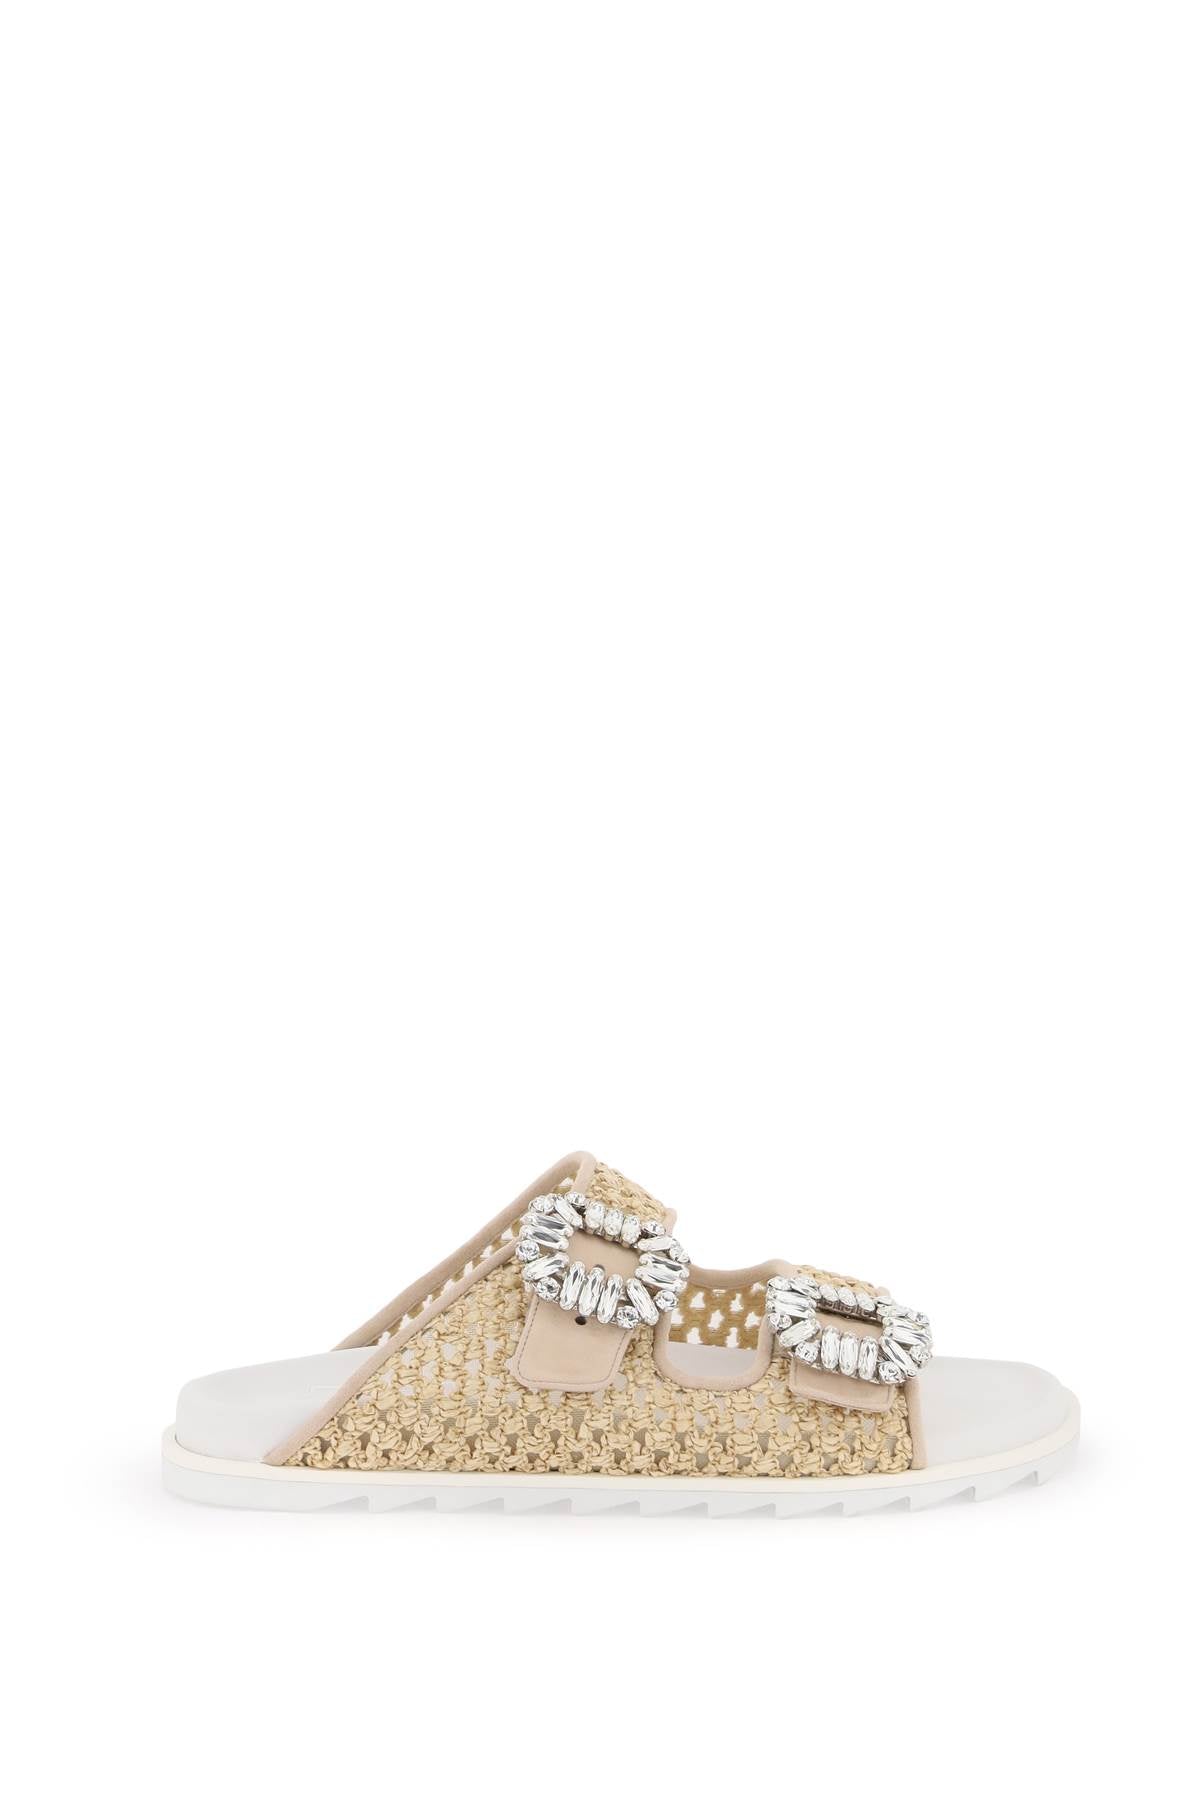 ROGER VIVIER Tan Rafia Slide Sandals with Strass Buckle for Women - SS24 Collection